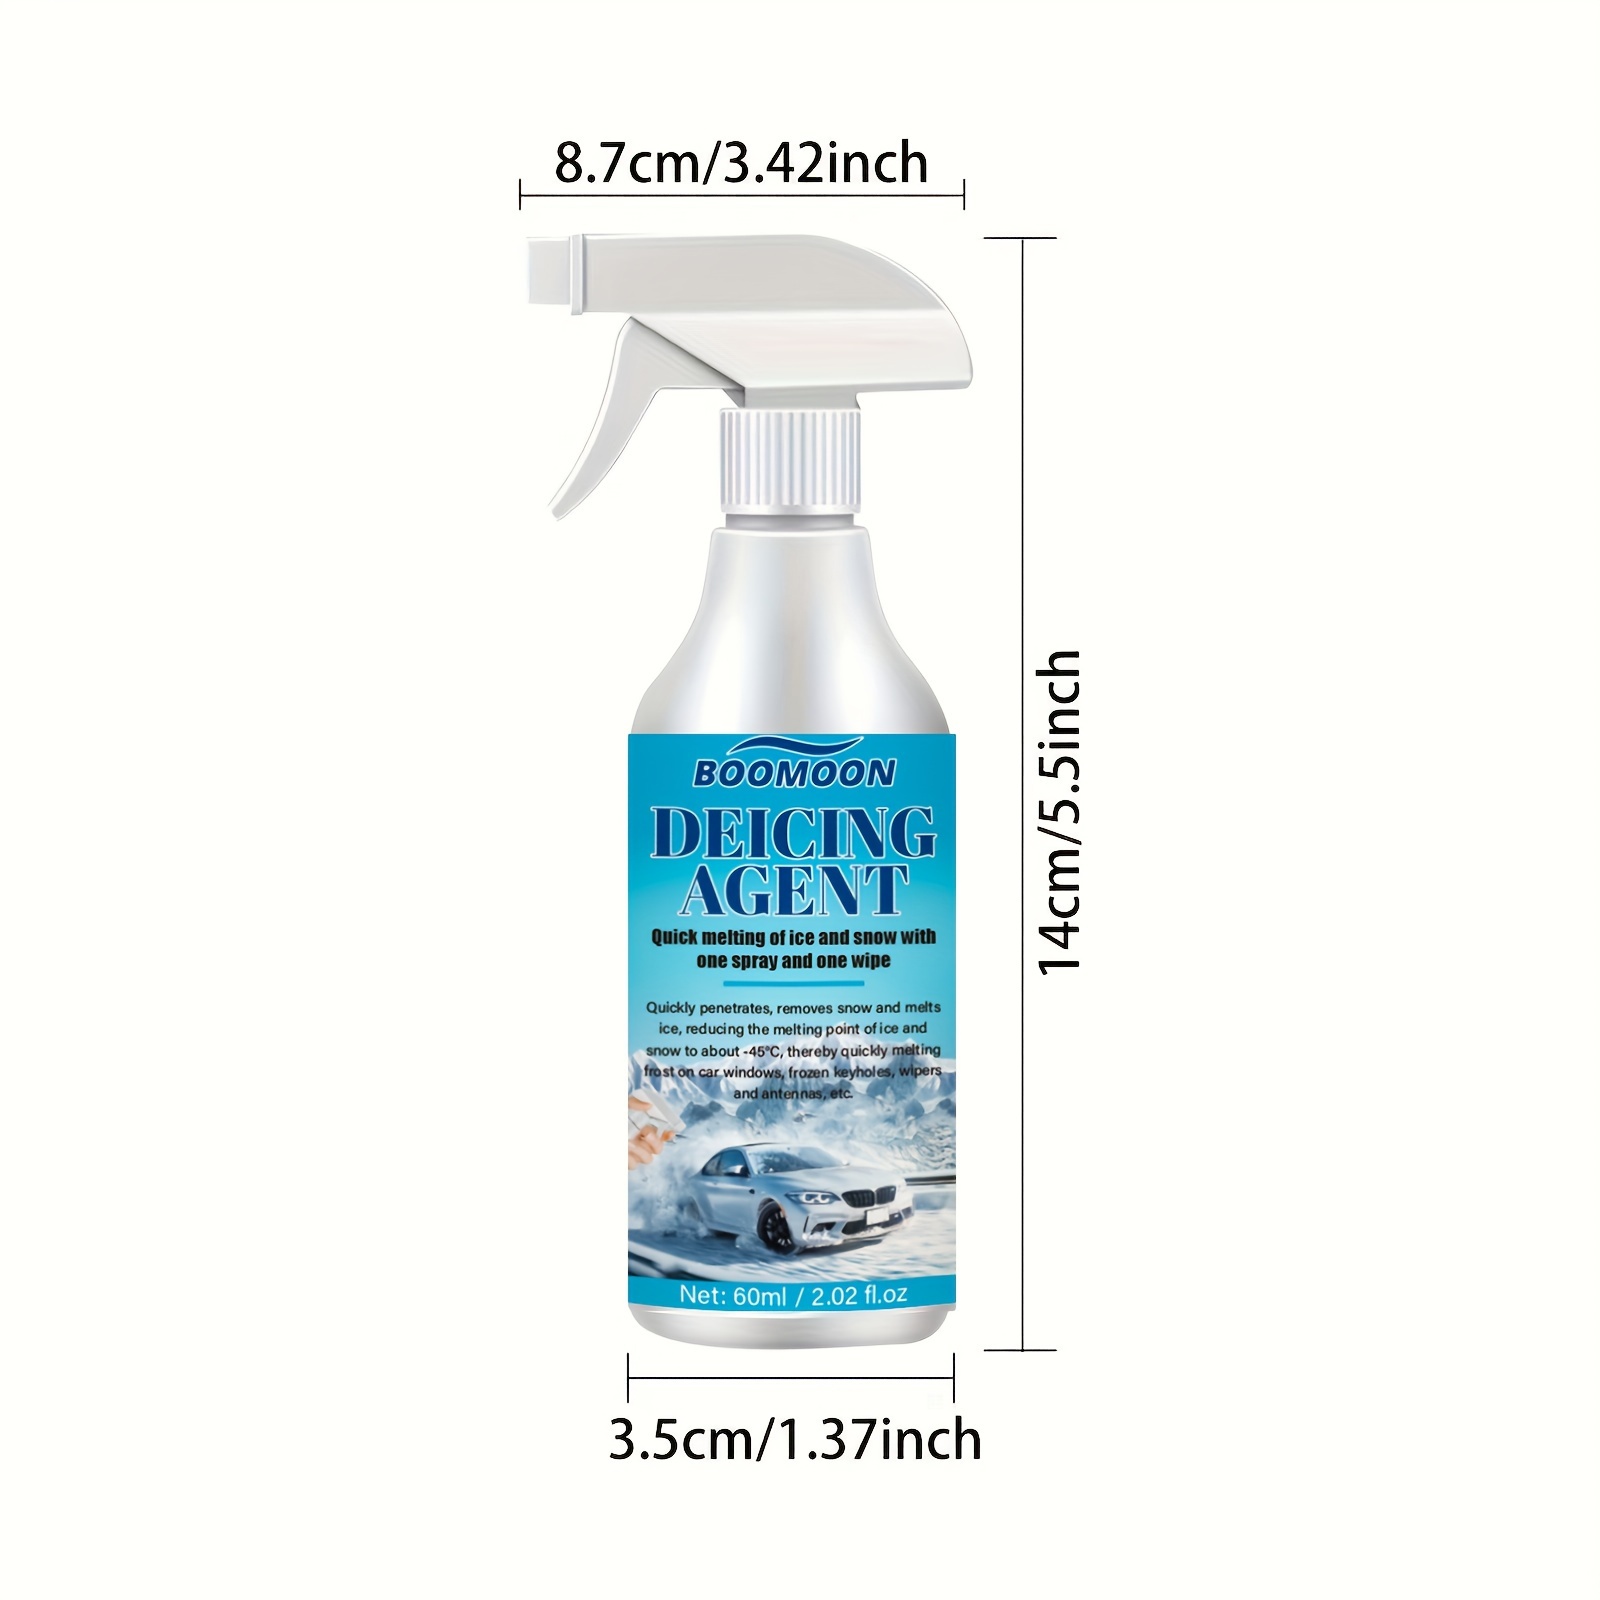  Car Glass Deicing & Anti-Freeze Spray, De Icer For Car  Windshield, Ice Remover Melting Spray For Car, Deicer Spray, For Car  Windshield Windows Wipers And Mirrors (1pcs) : Automotive